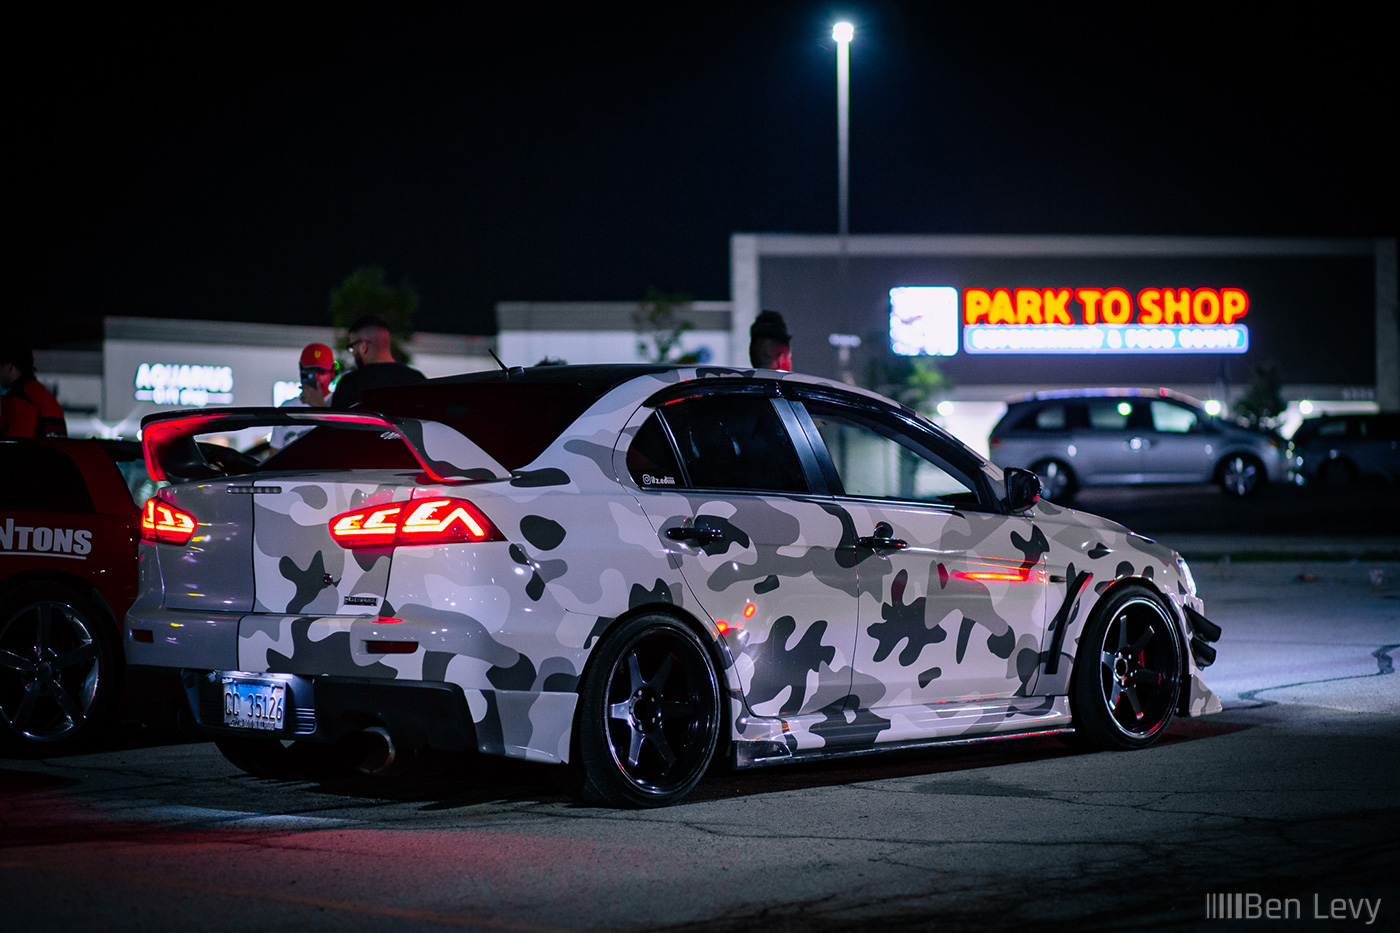 Camoflauge Wrapped Lancer Evo X in Parking Lot at Night